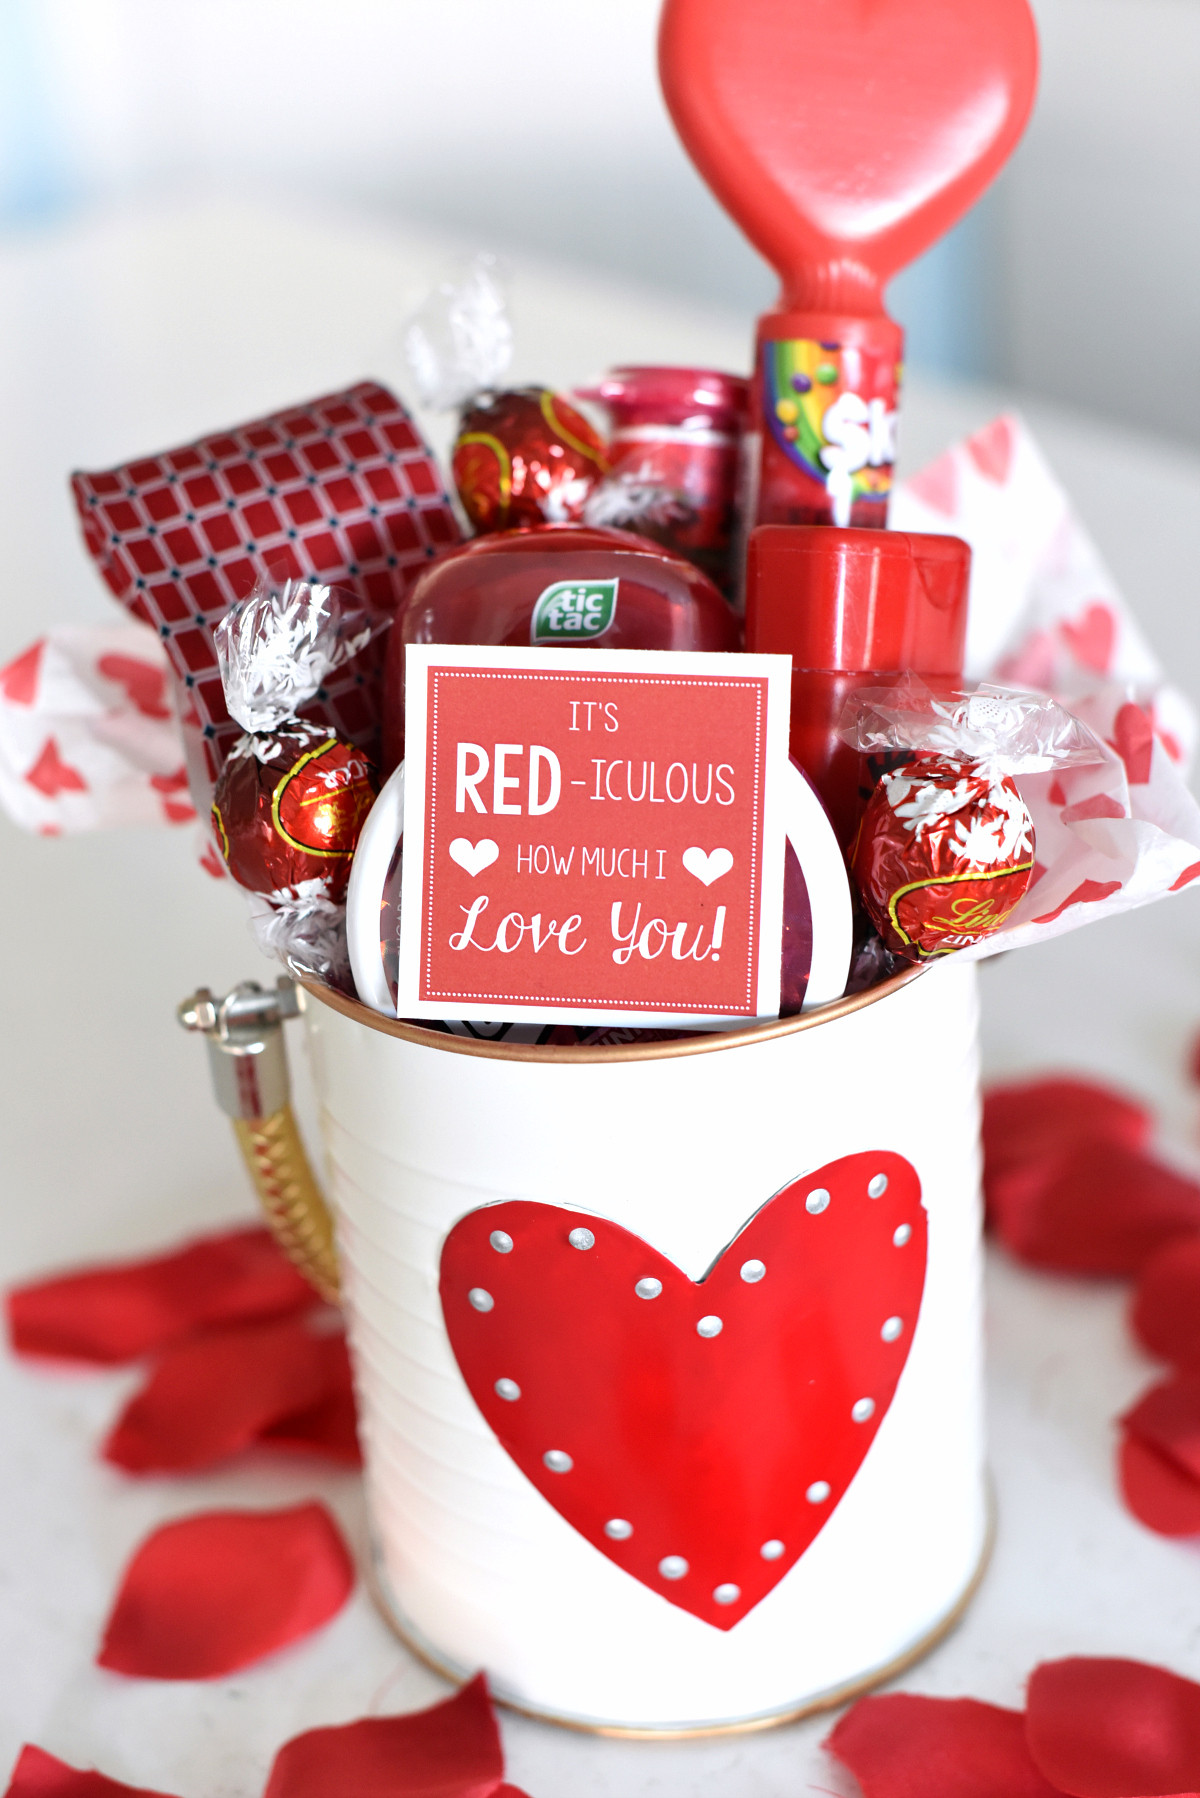 Unique Valentines Gift Ideas For Her
 25 DIY Valentine s Day Gift Ideas Teens Will Love